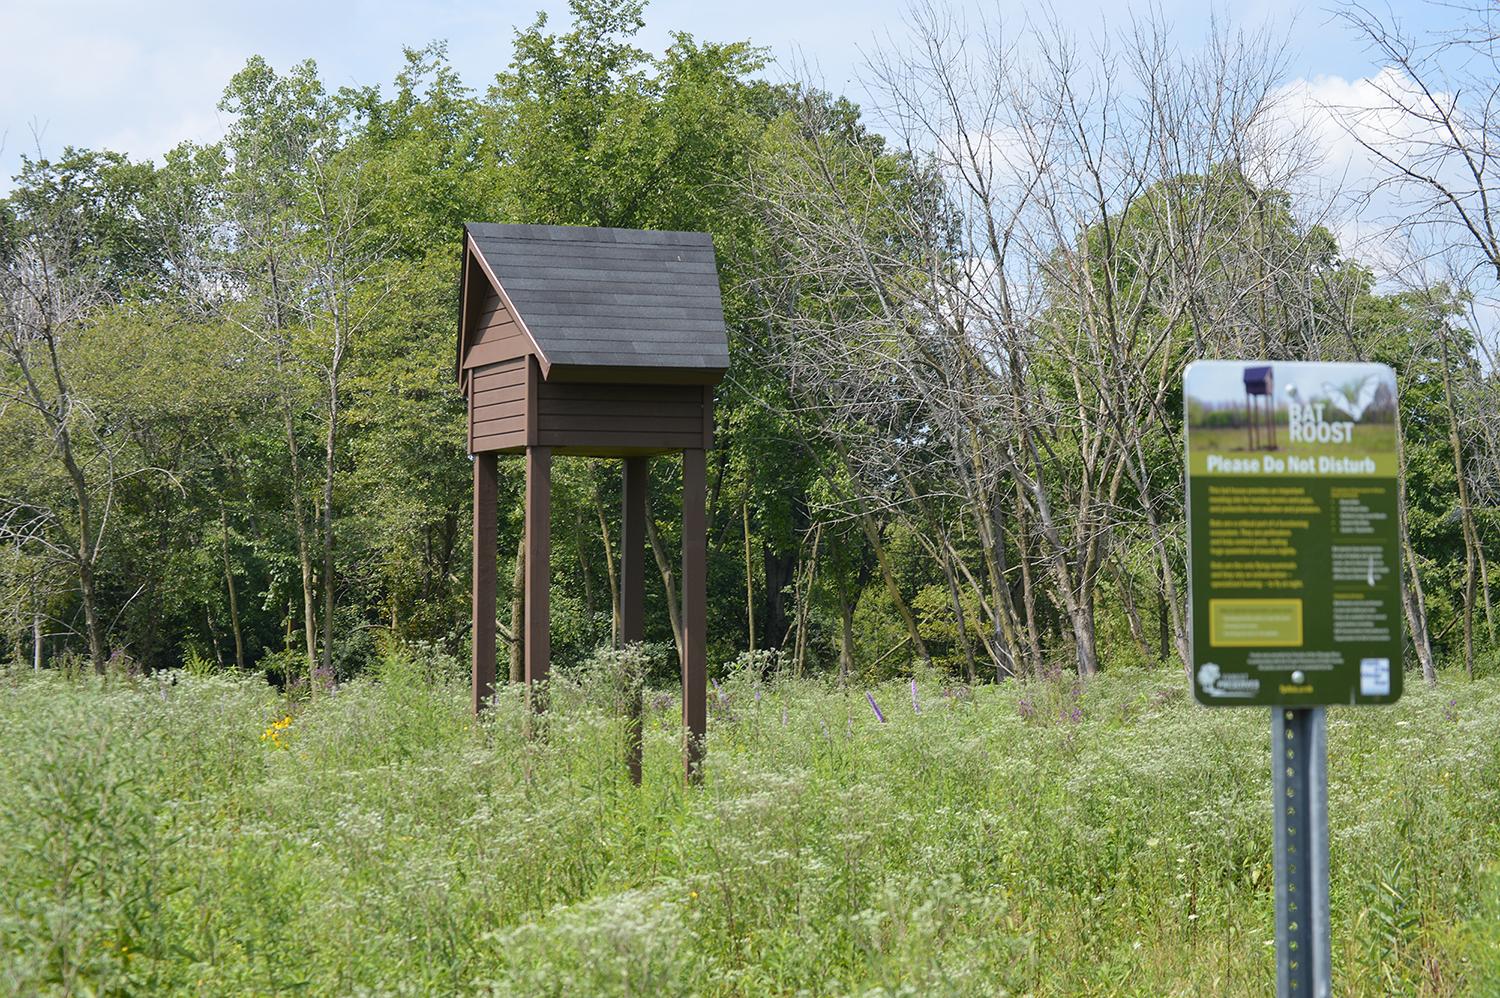 Conservationists have installed five bat houses in Cook County since 2016 to provide safe maternity colonies where female bats can give birth and nurse their pups. (Courtesy Friends of the Chicago River)